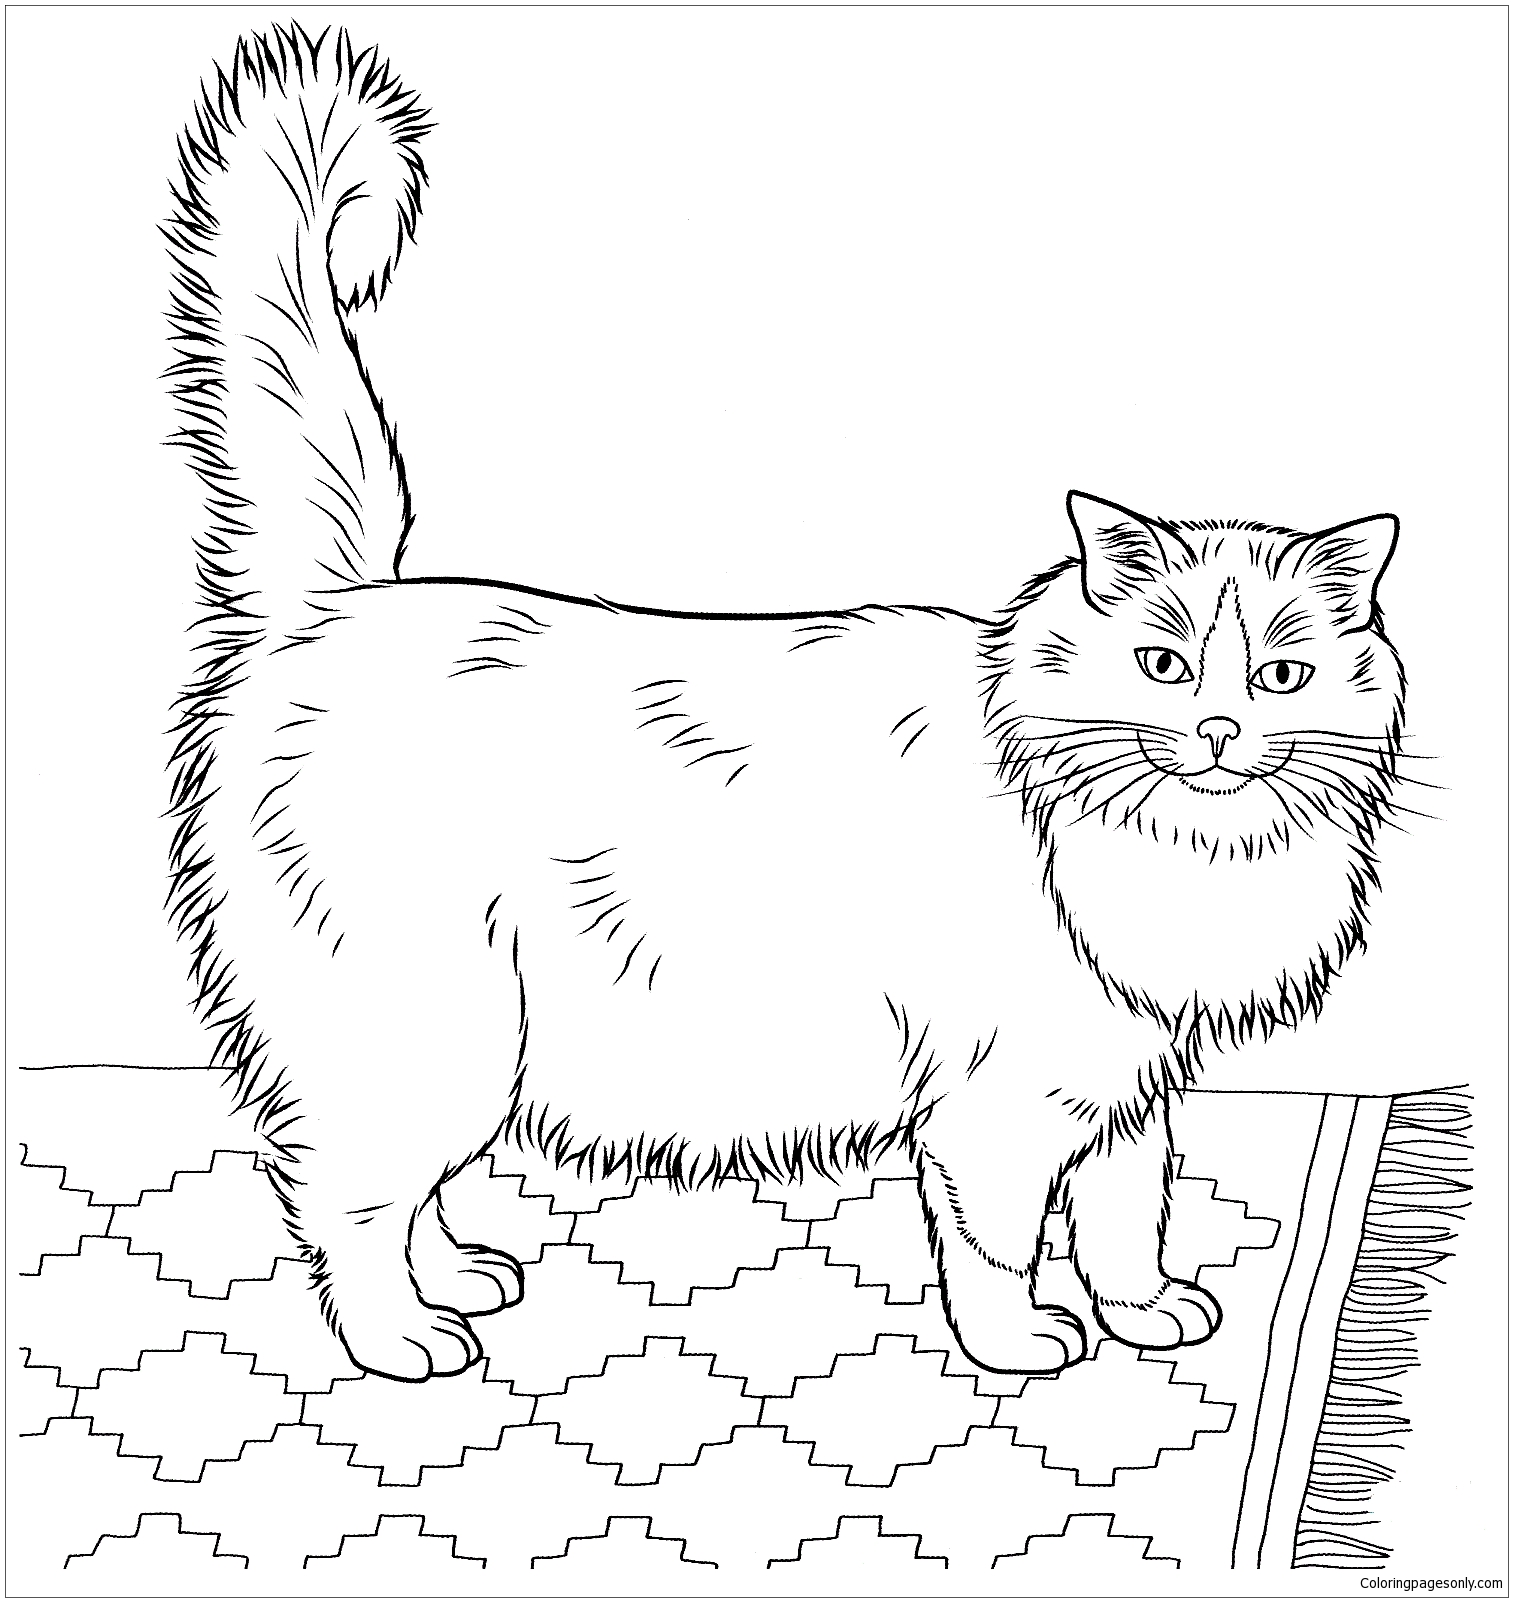 Ragdoll Cat 2 Coloring Page